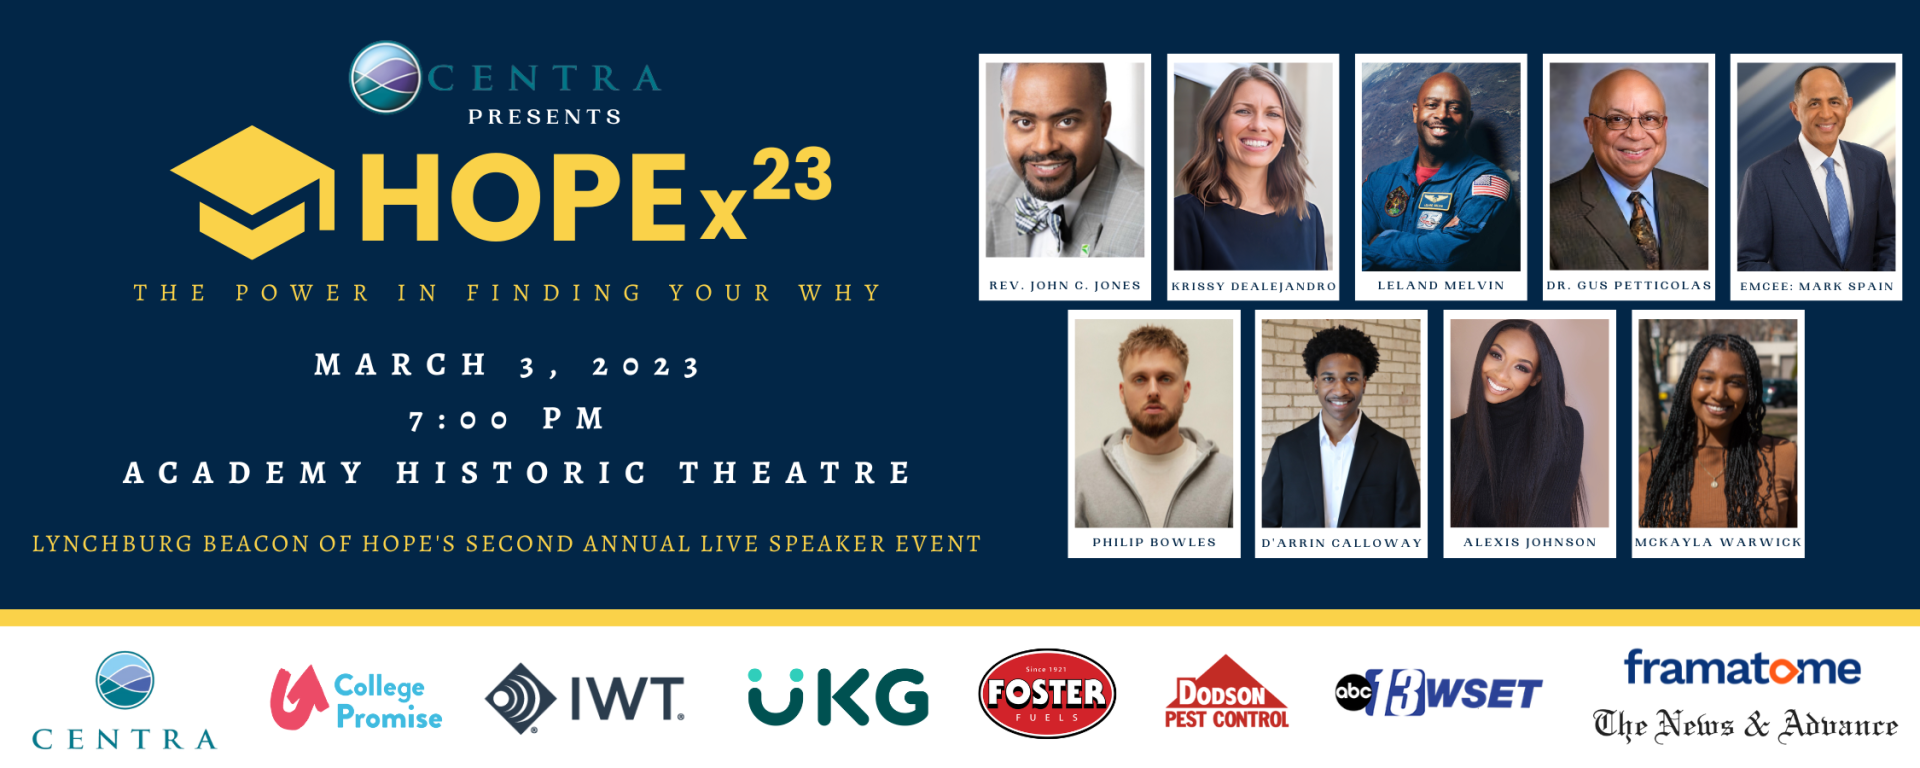 HOPEx Banner featuring the speaker slate and sponsors